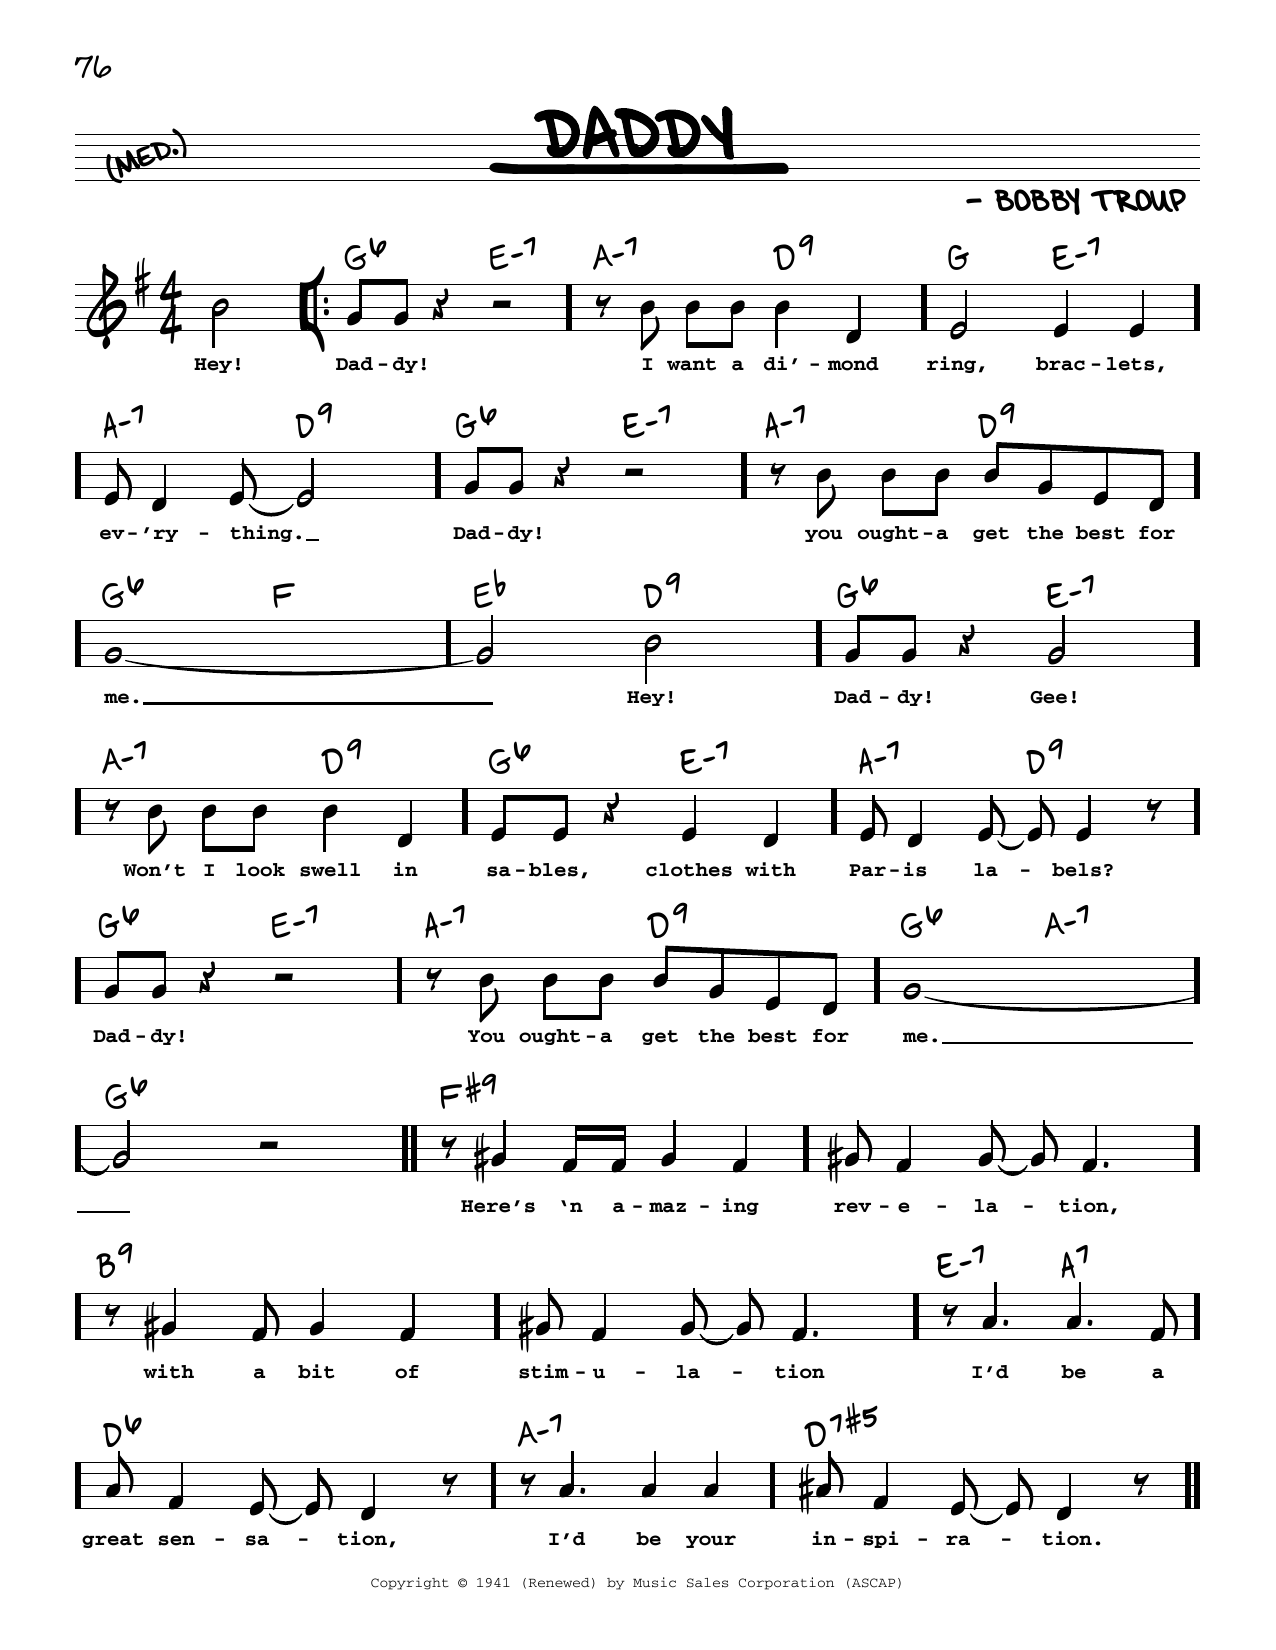 Download Bobby Troup Daddy (Low Voice) Sheet Music